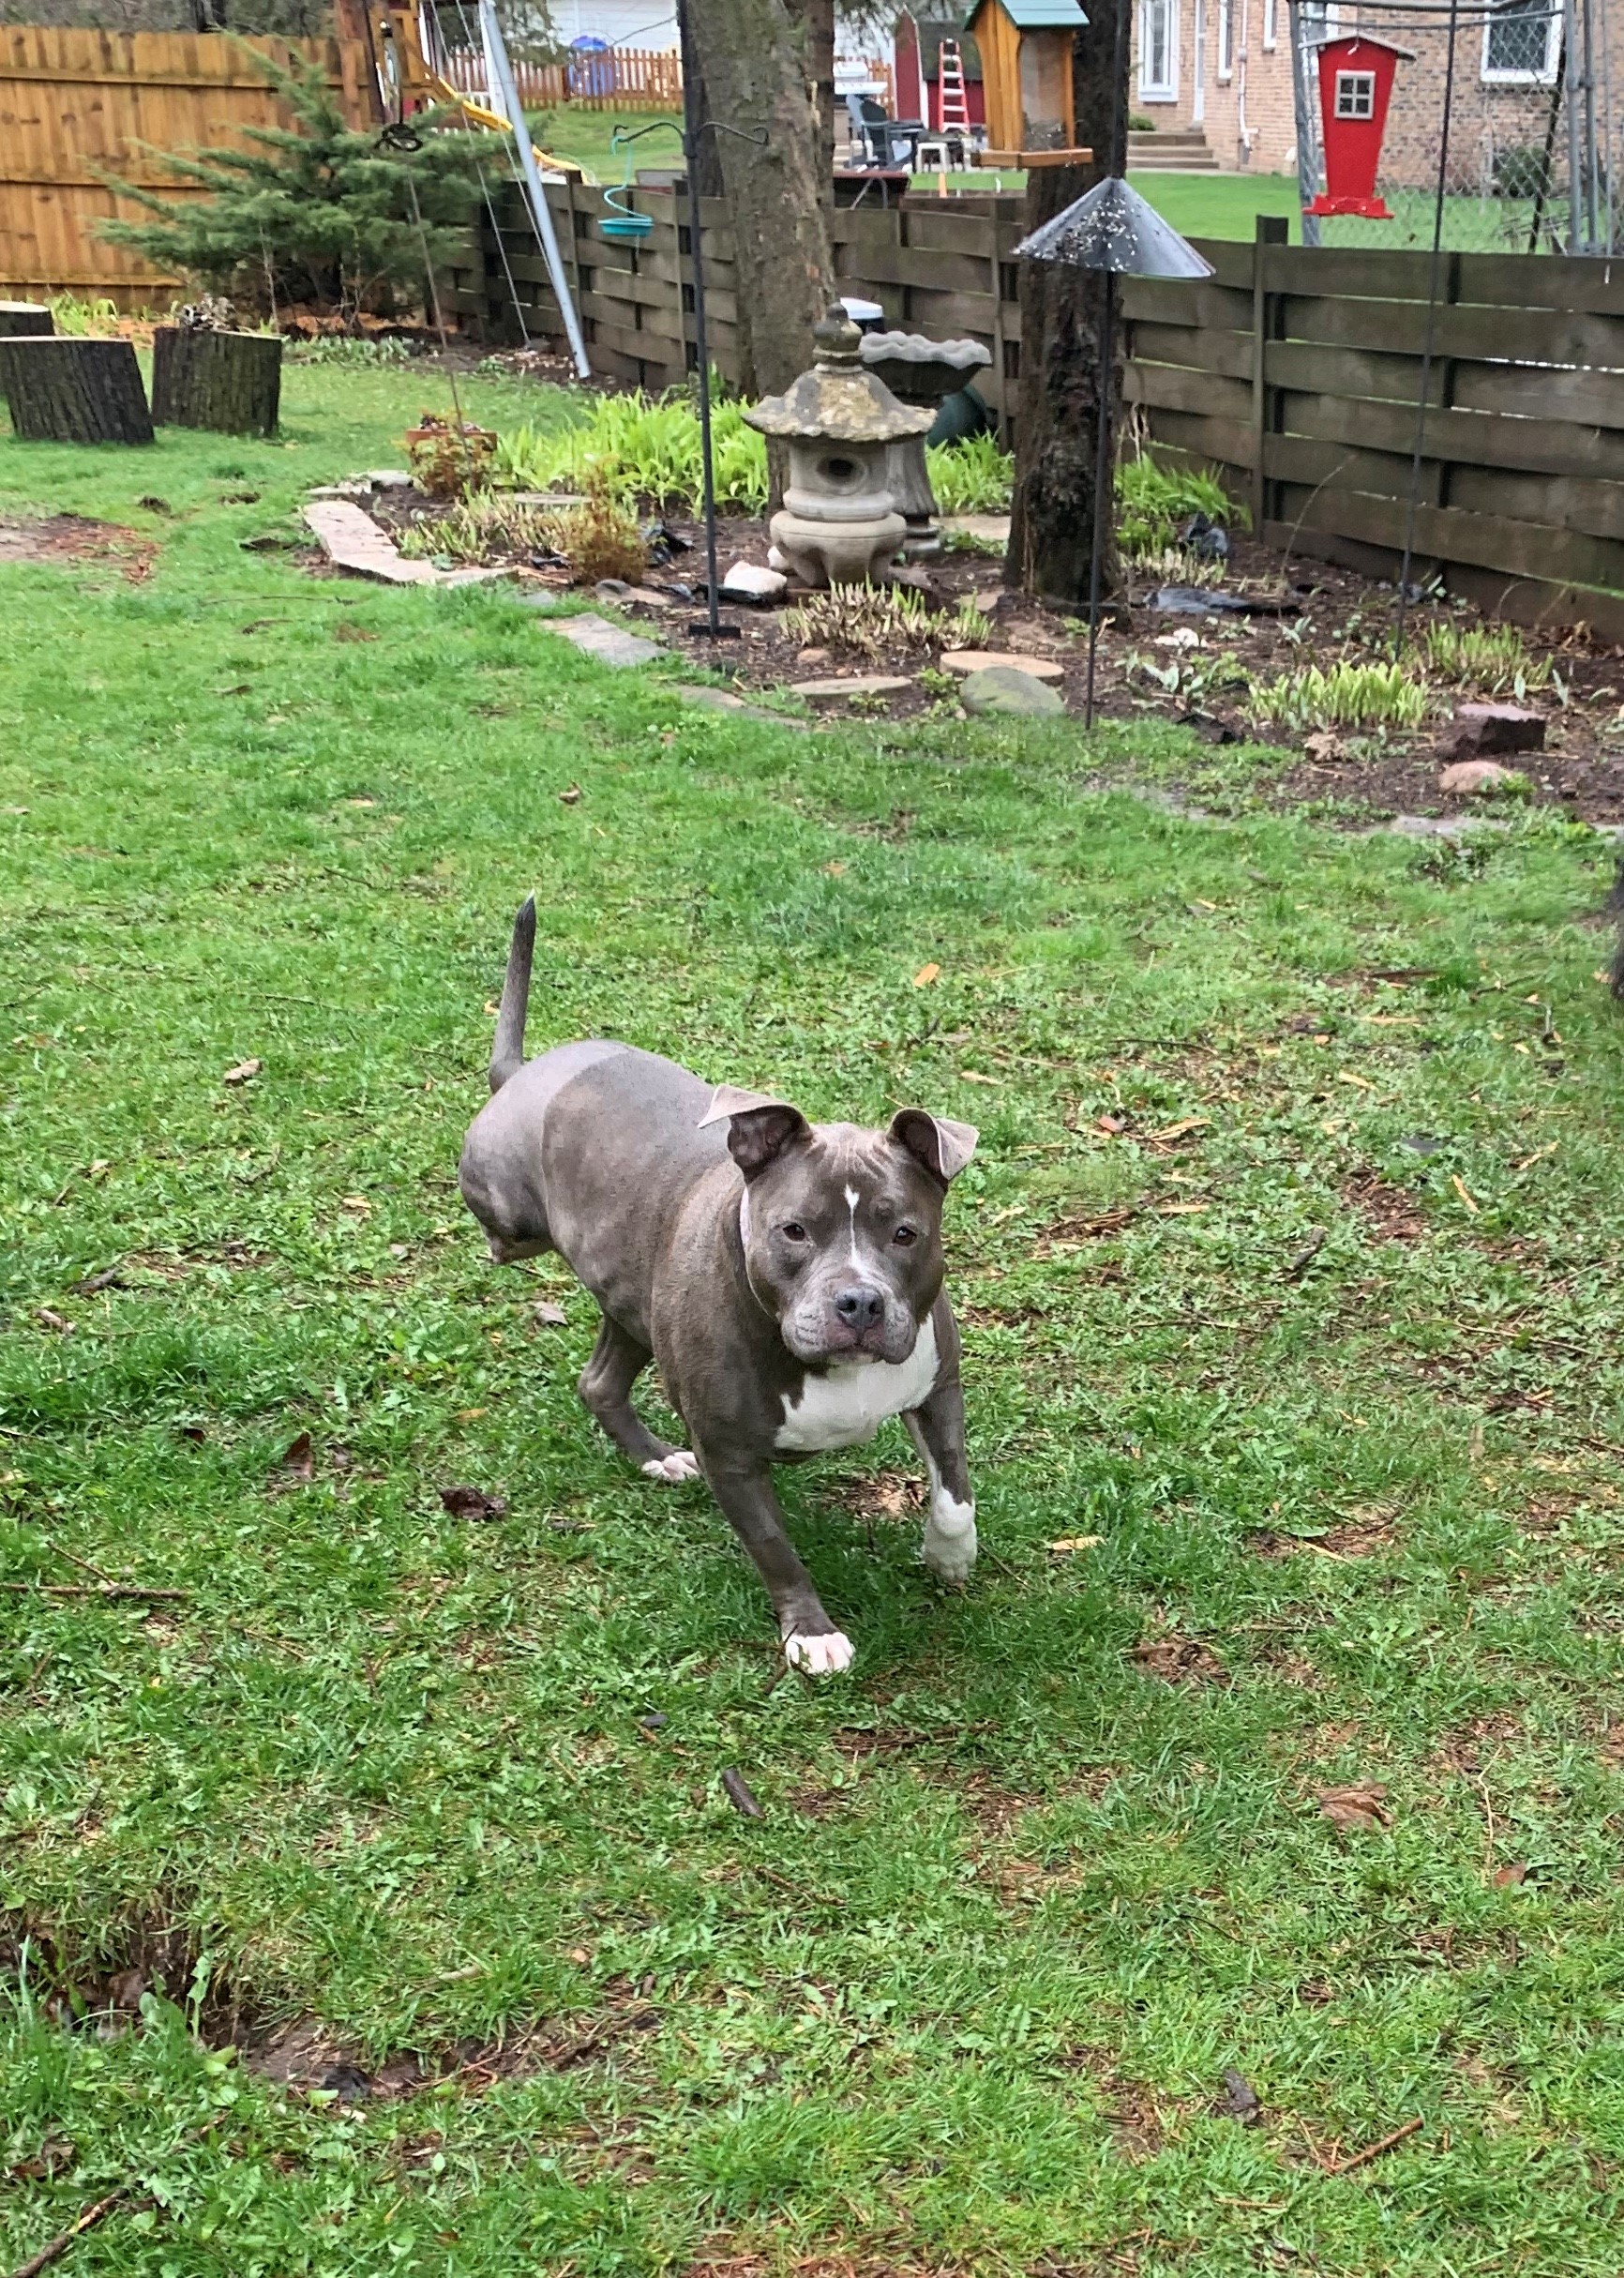 A muscular gray-and-white dog runs around a grassy yard on three legs. She is missing her left hind leg.